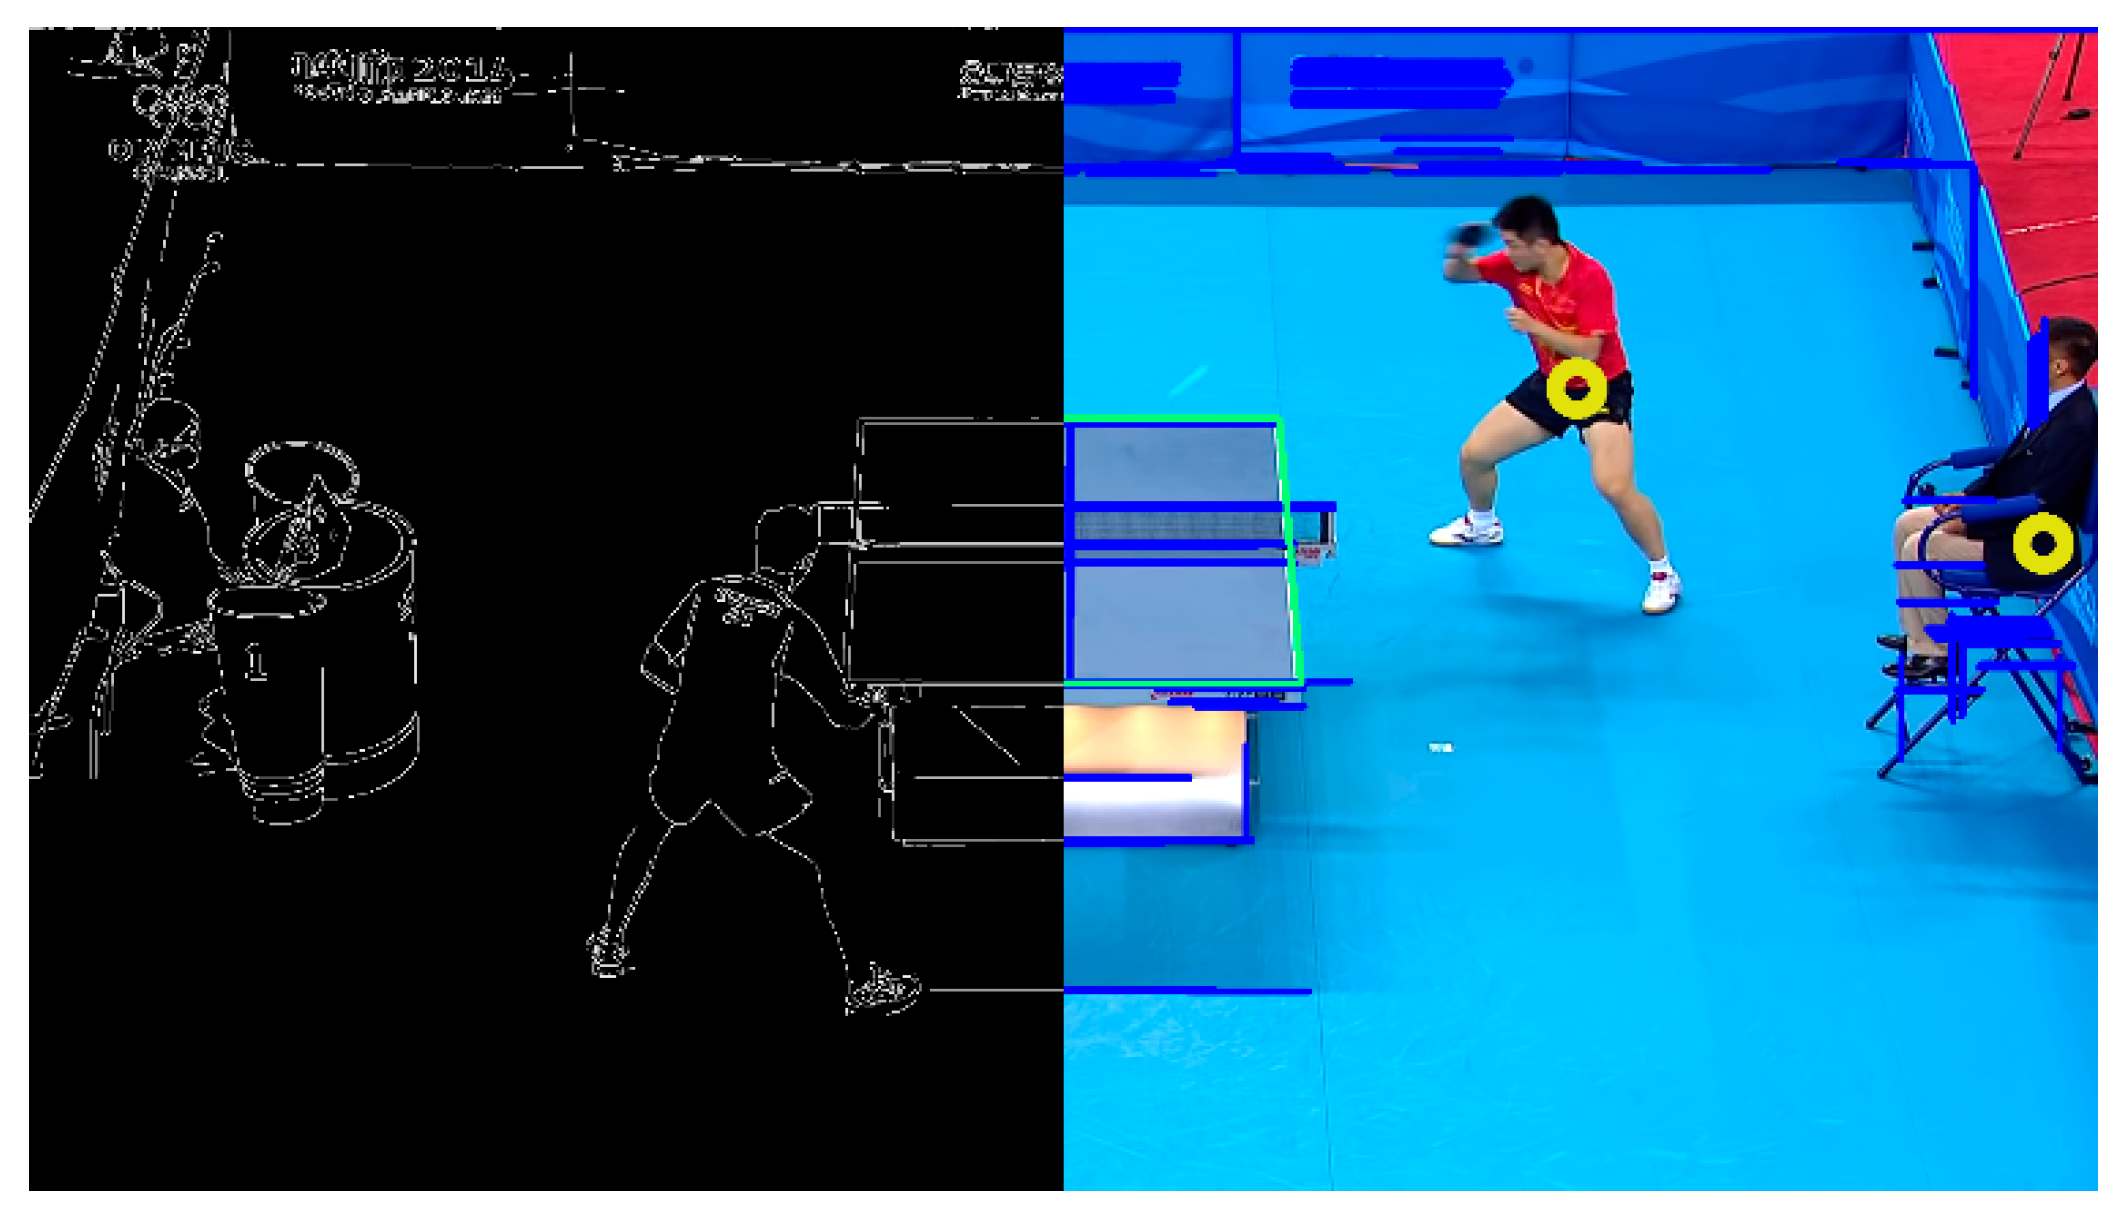 Facing robot opponents puts table tennis players' brains on high-alert, Science